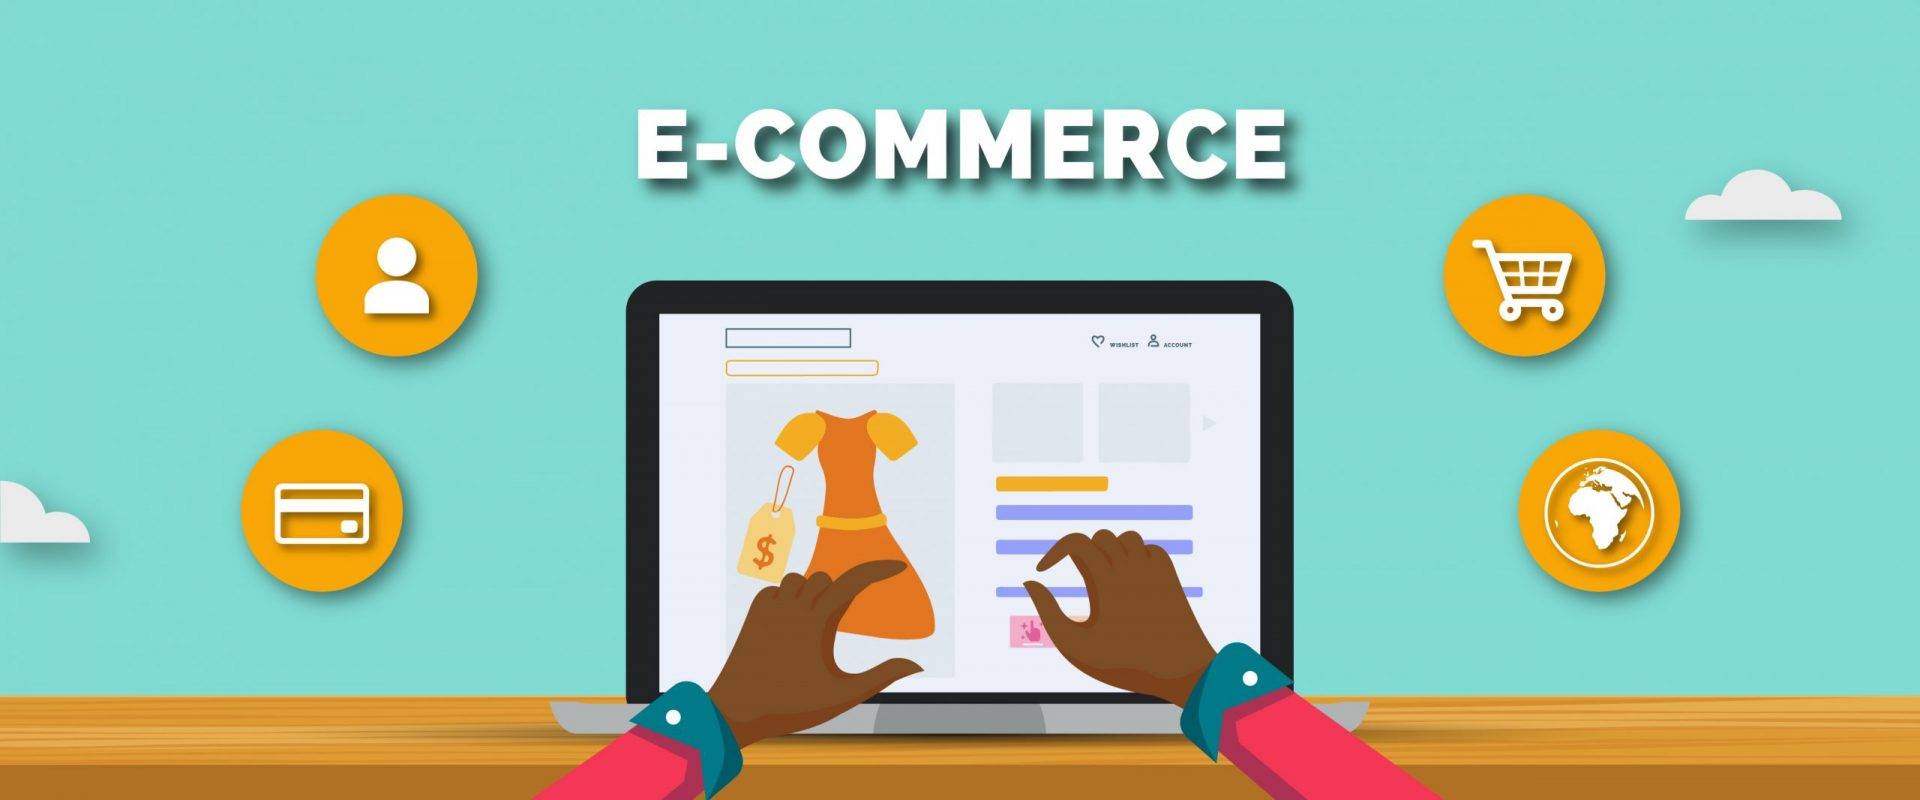 African eCommerce startups - An Analysis Of The Startup Investment Landscape